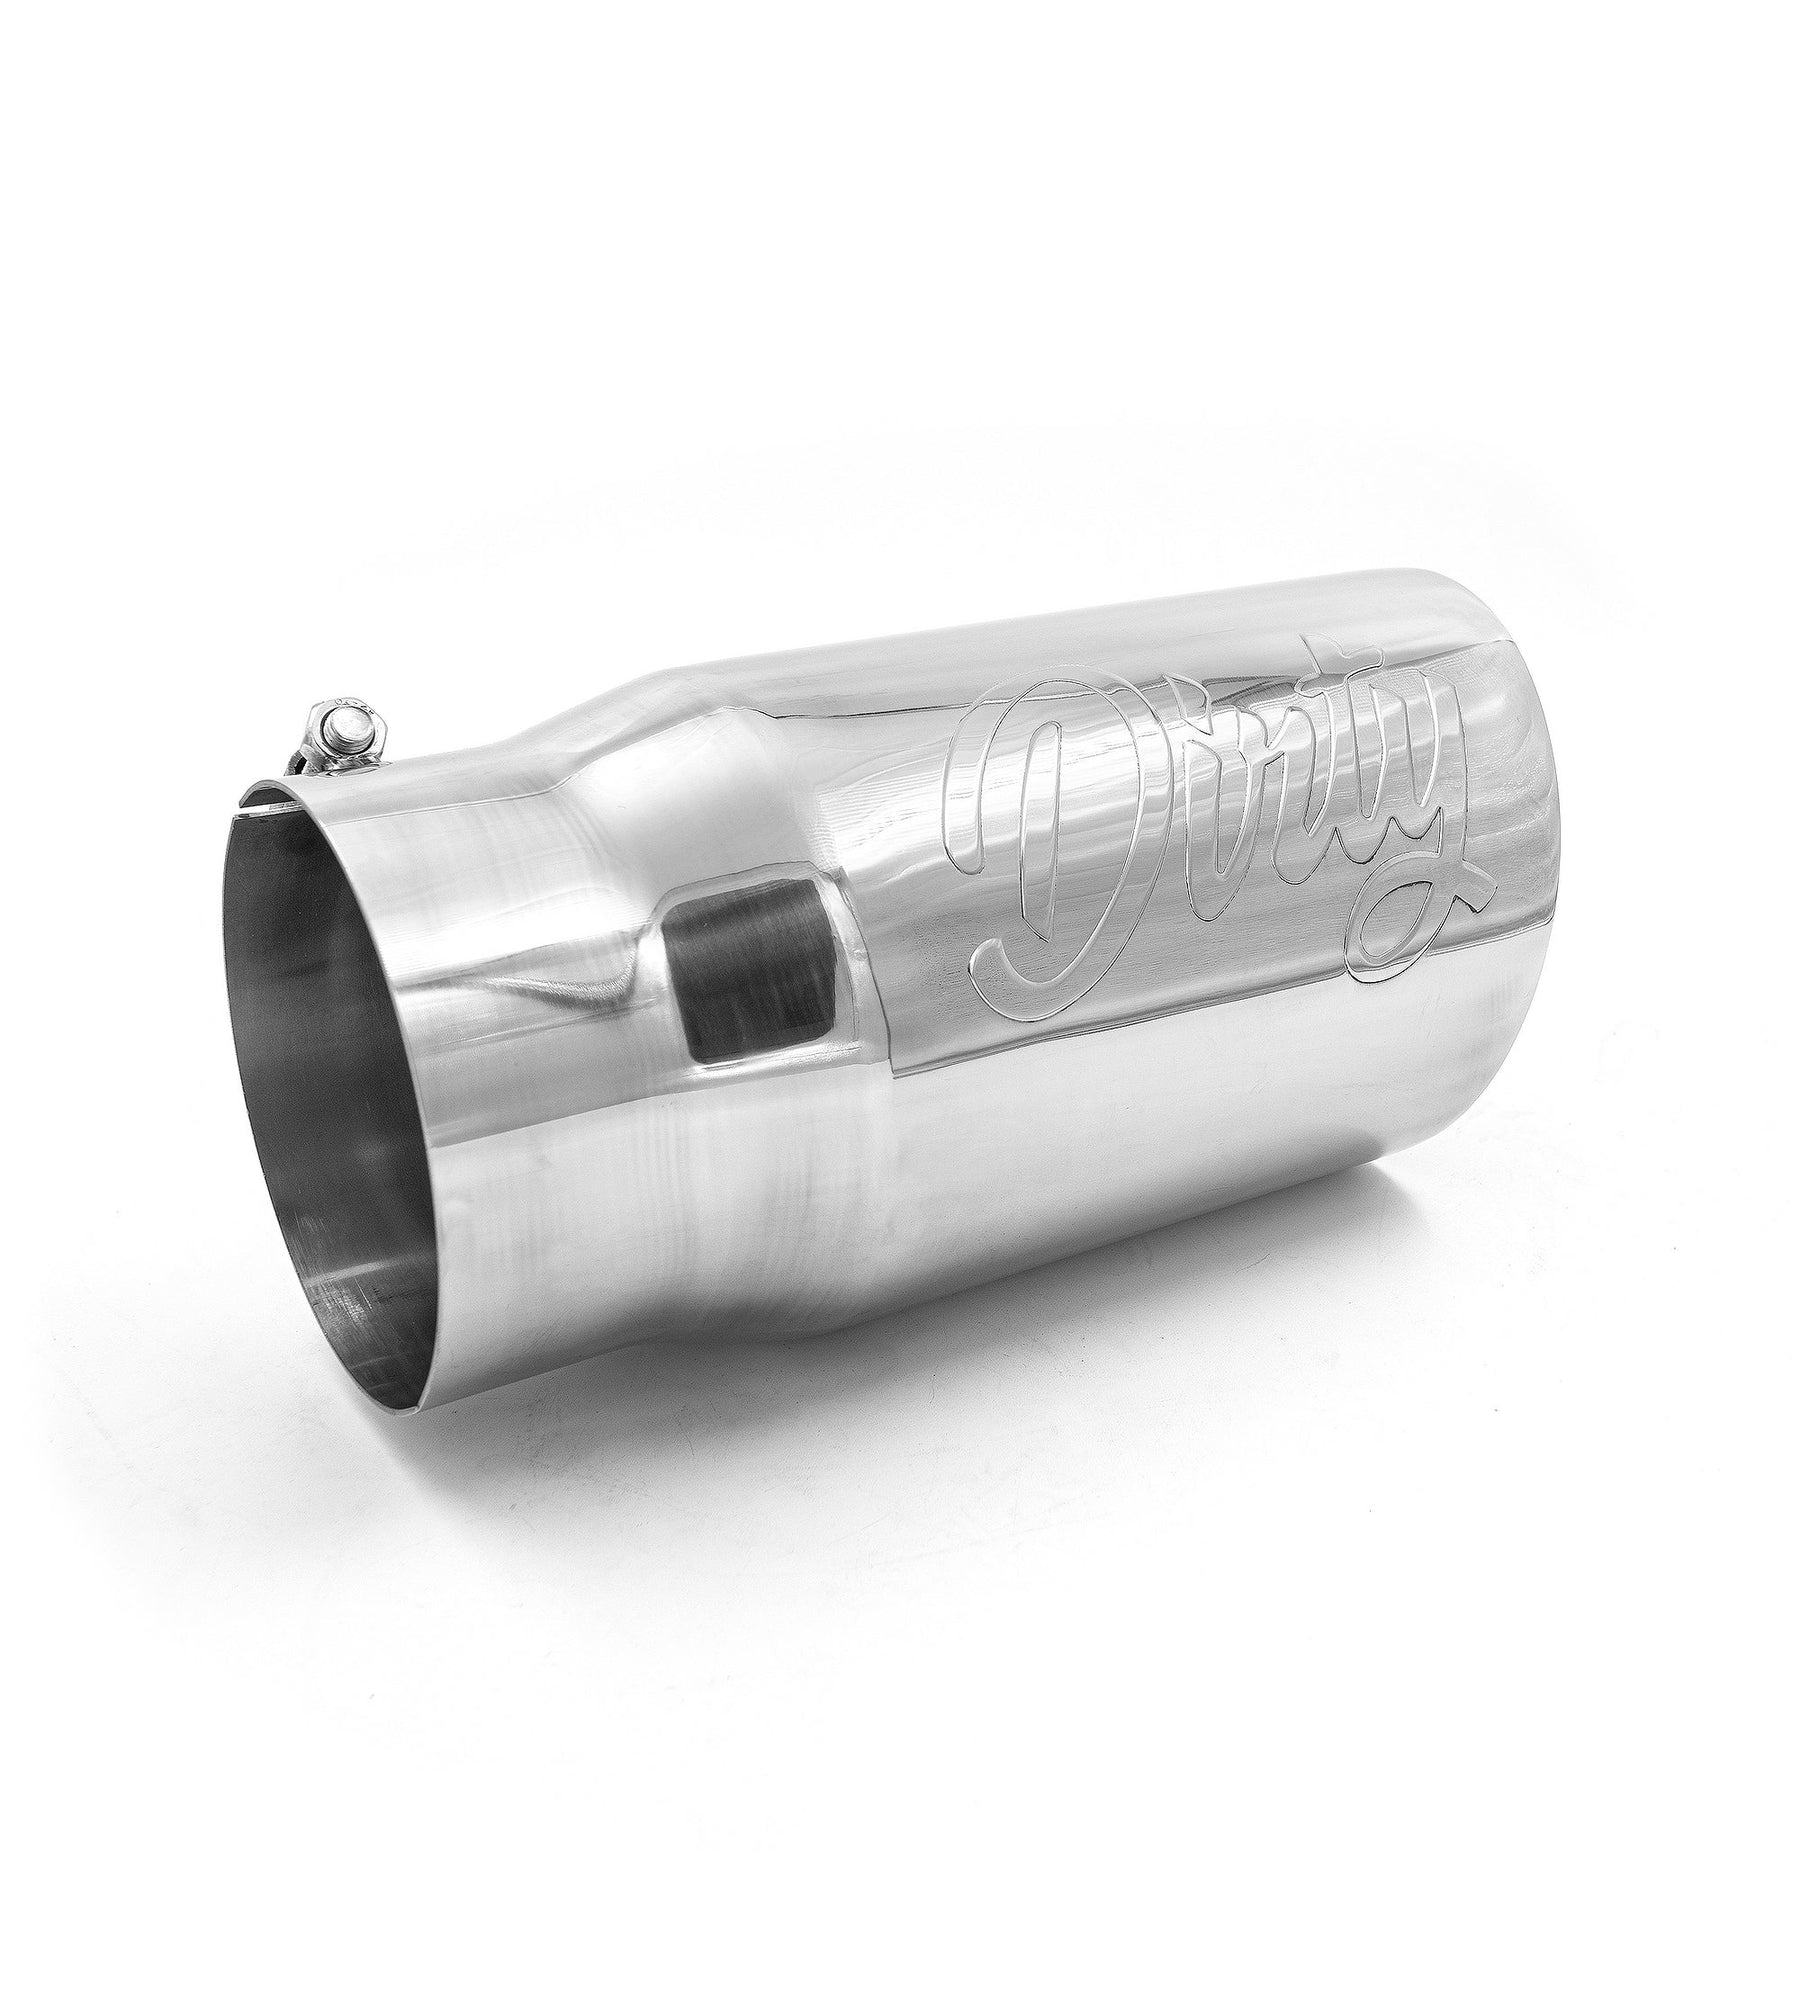 Universal 5 to 6" Dirty Stainless Exhaust Tip (DDC-EXH-A056)-Exhaust Tips-Dirty Diesel Customs-Dirty Diesel Customs